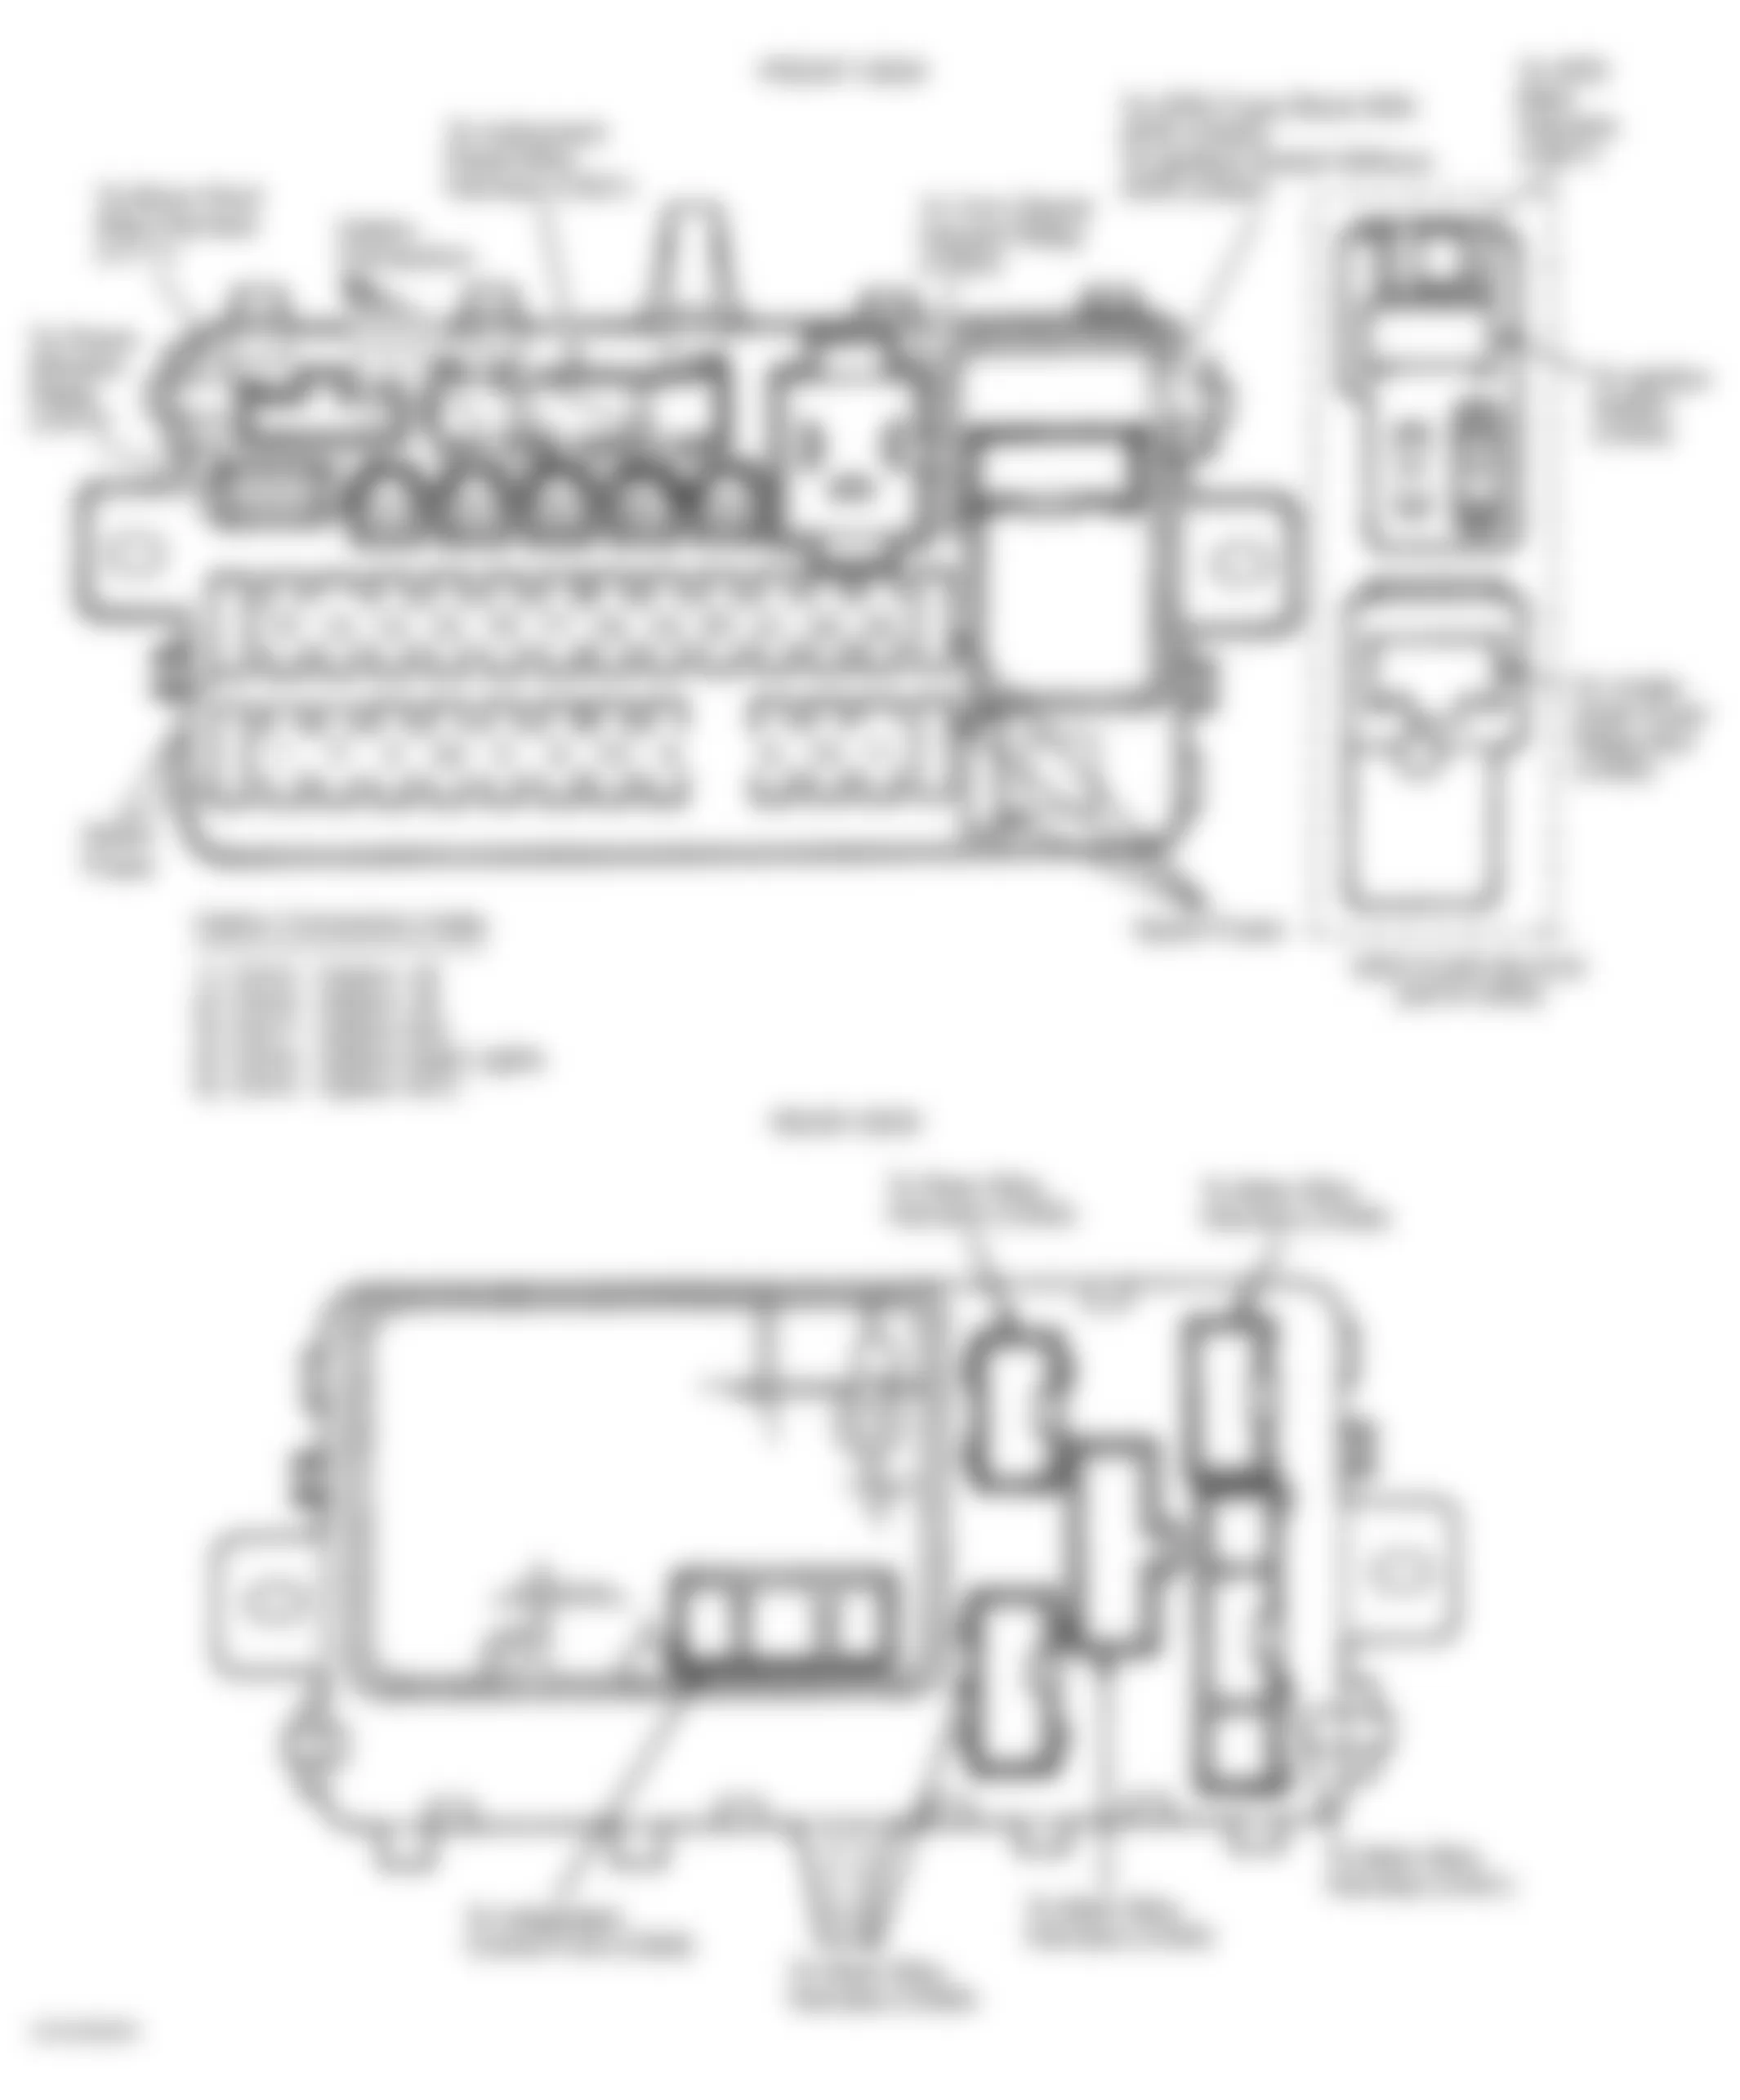 Honda Civic Si 1993 - Component Locations -  Identifying Under-Dash Fuse/Relay Box Components (1994-95 Civic)